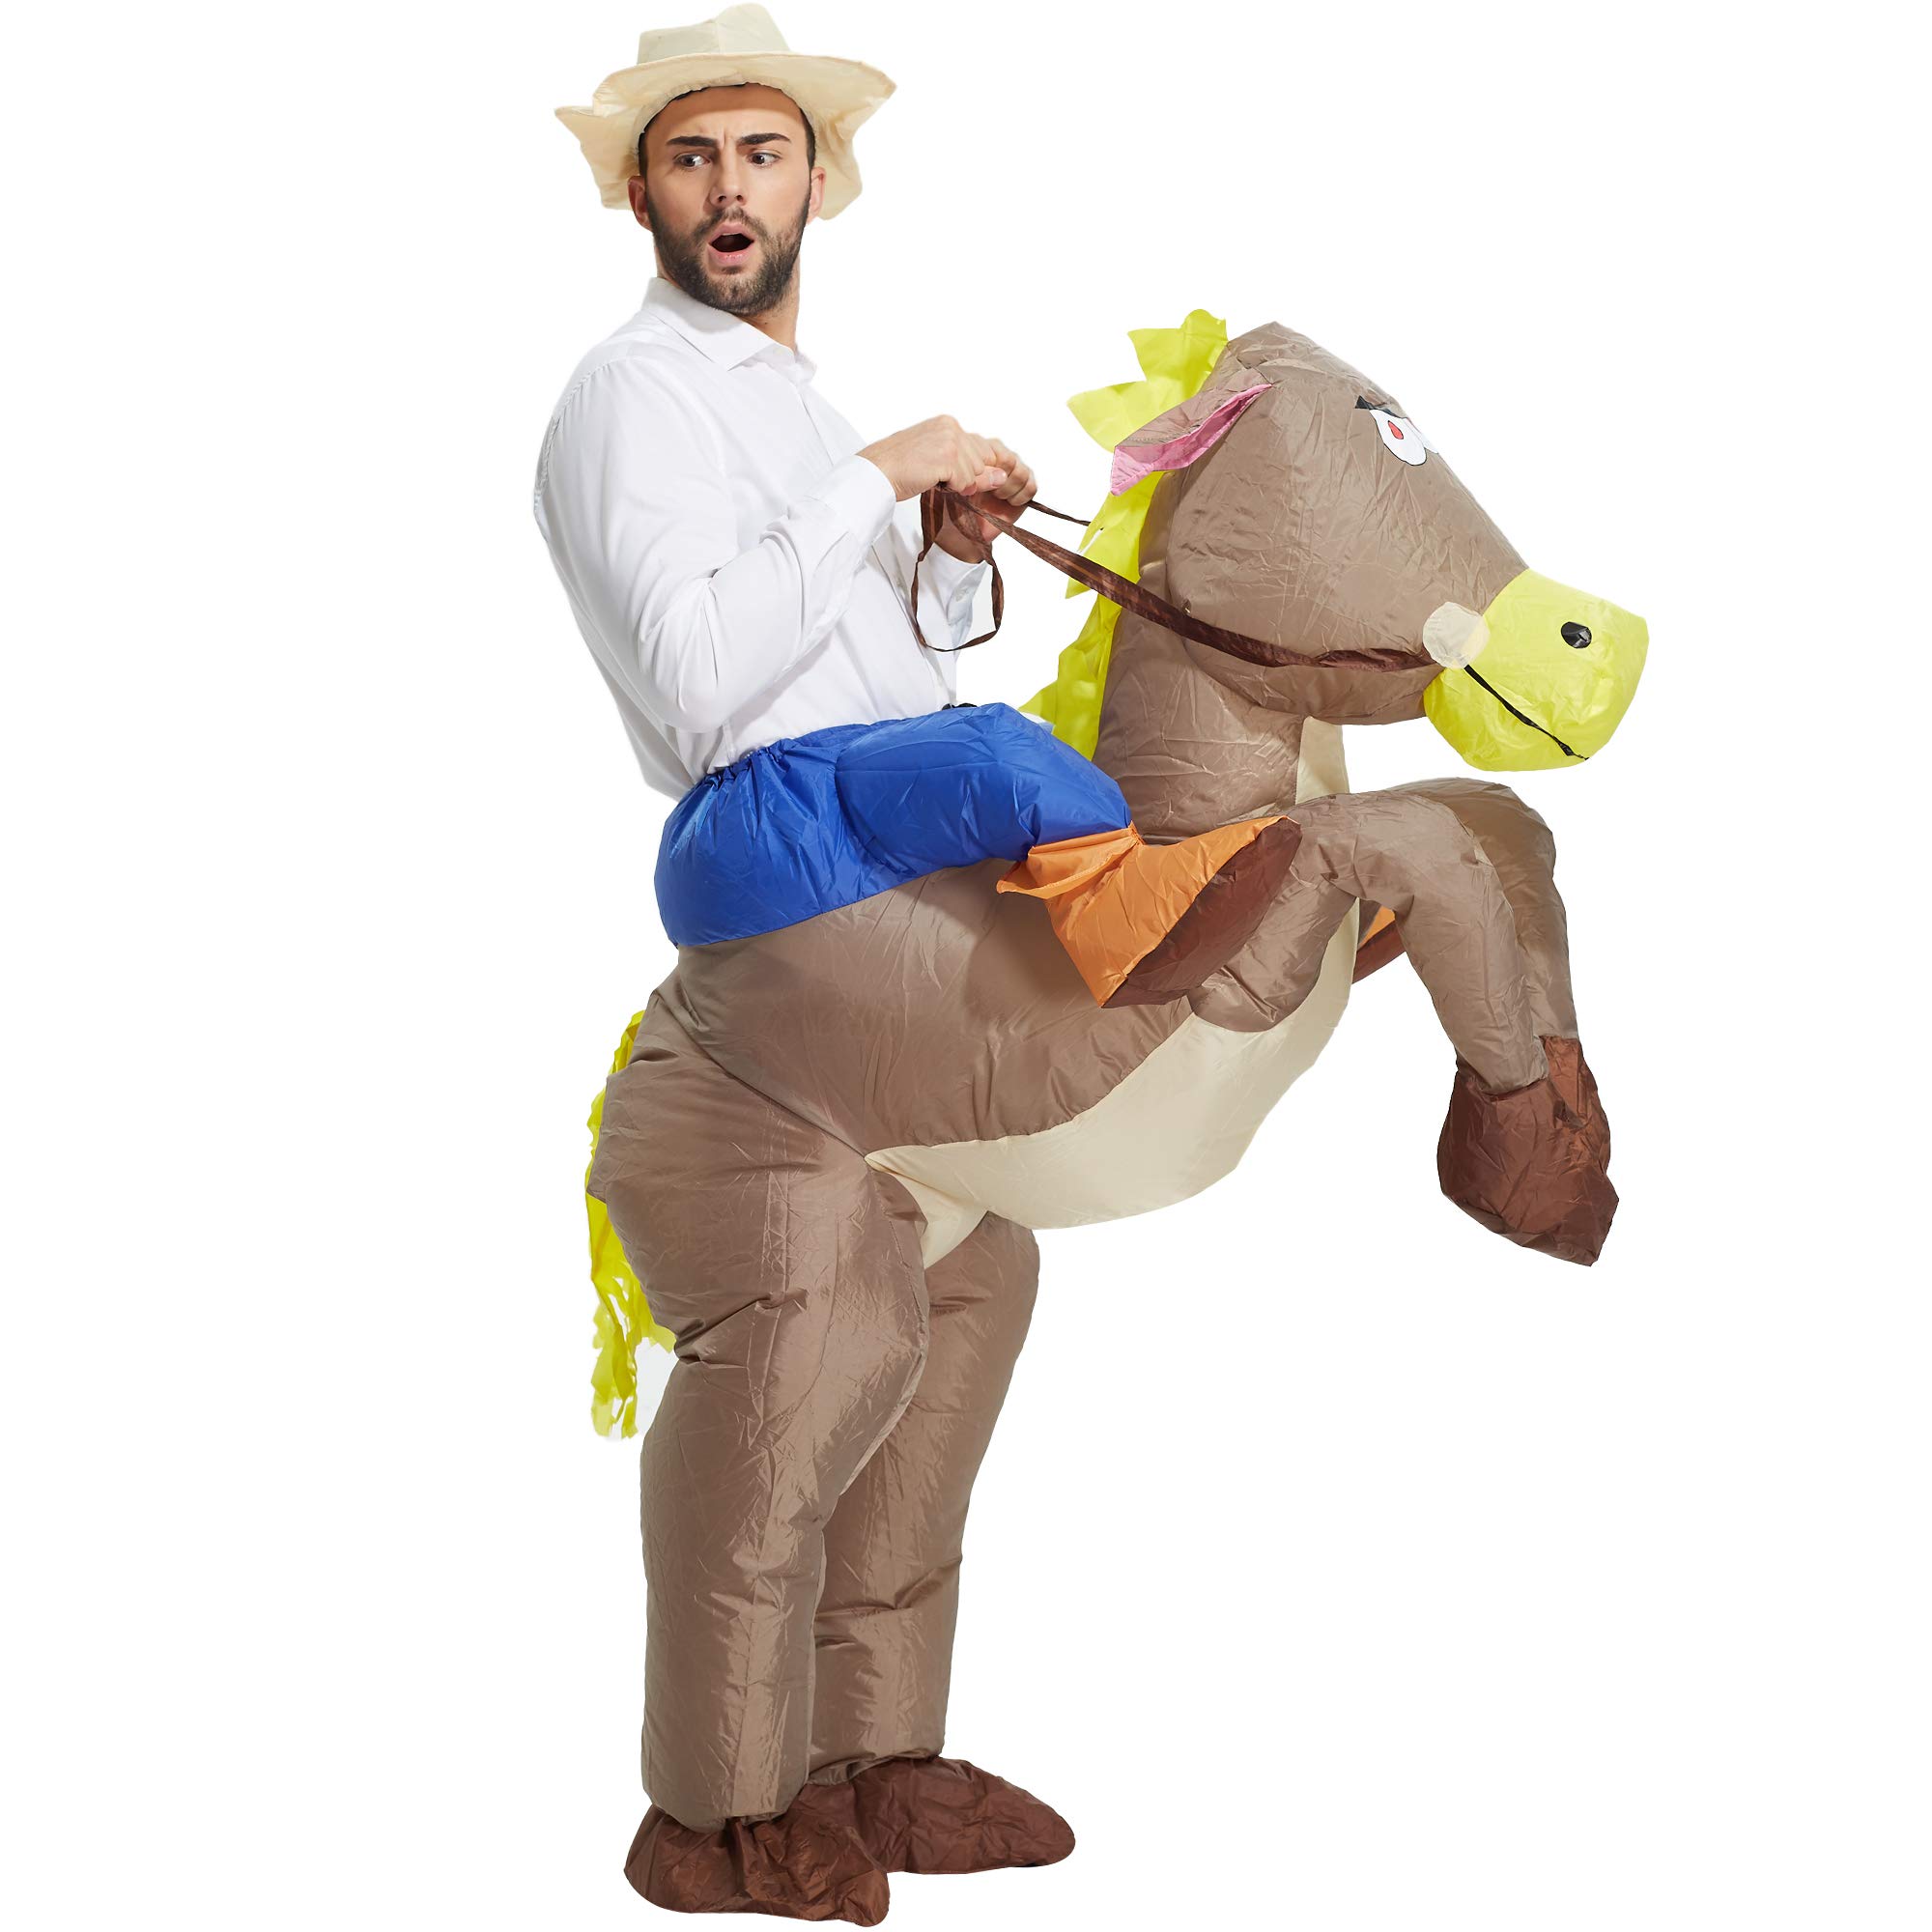 TOLOCO Inflatable Costume Adults, Cowboy Costume, Inflatable Horse Costume for Boy, Kid Blow up Costume Halloween